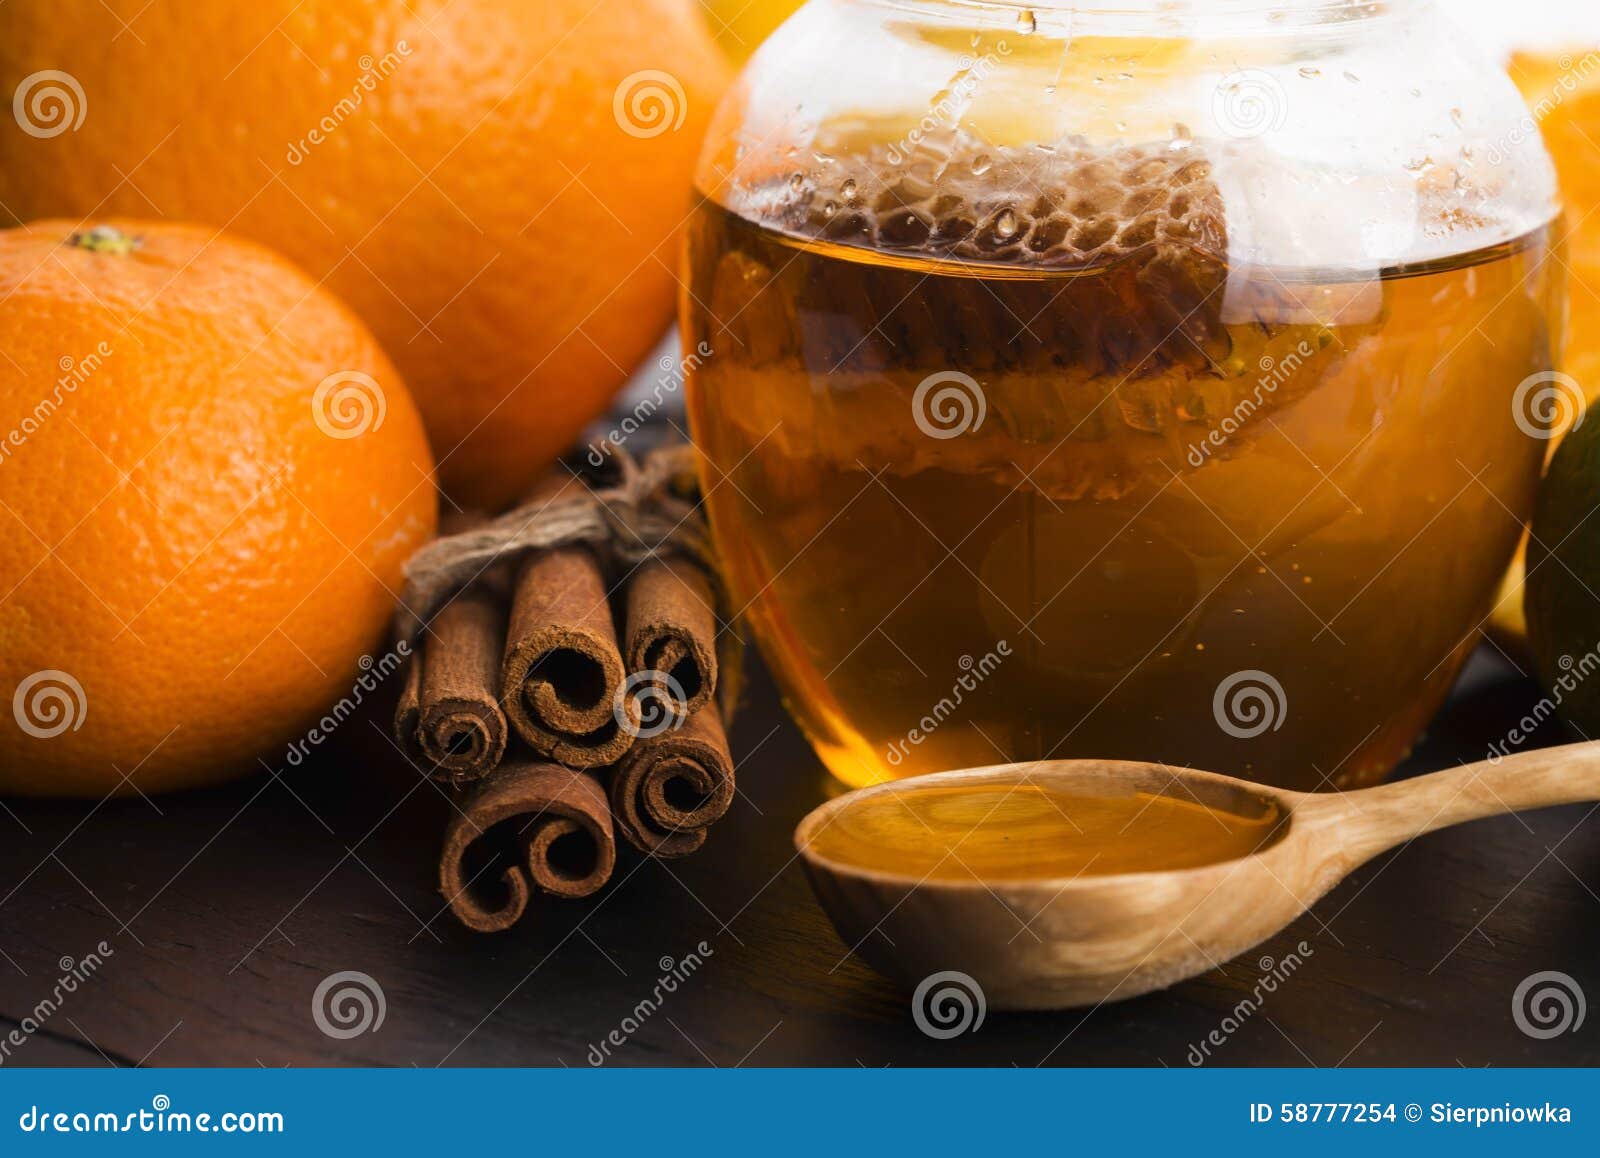 Bread and Jar of Lavender Honey Stock Photo - Image of comb, baguette ...